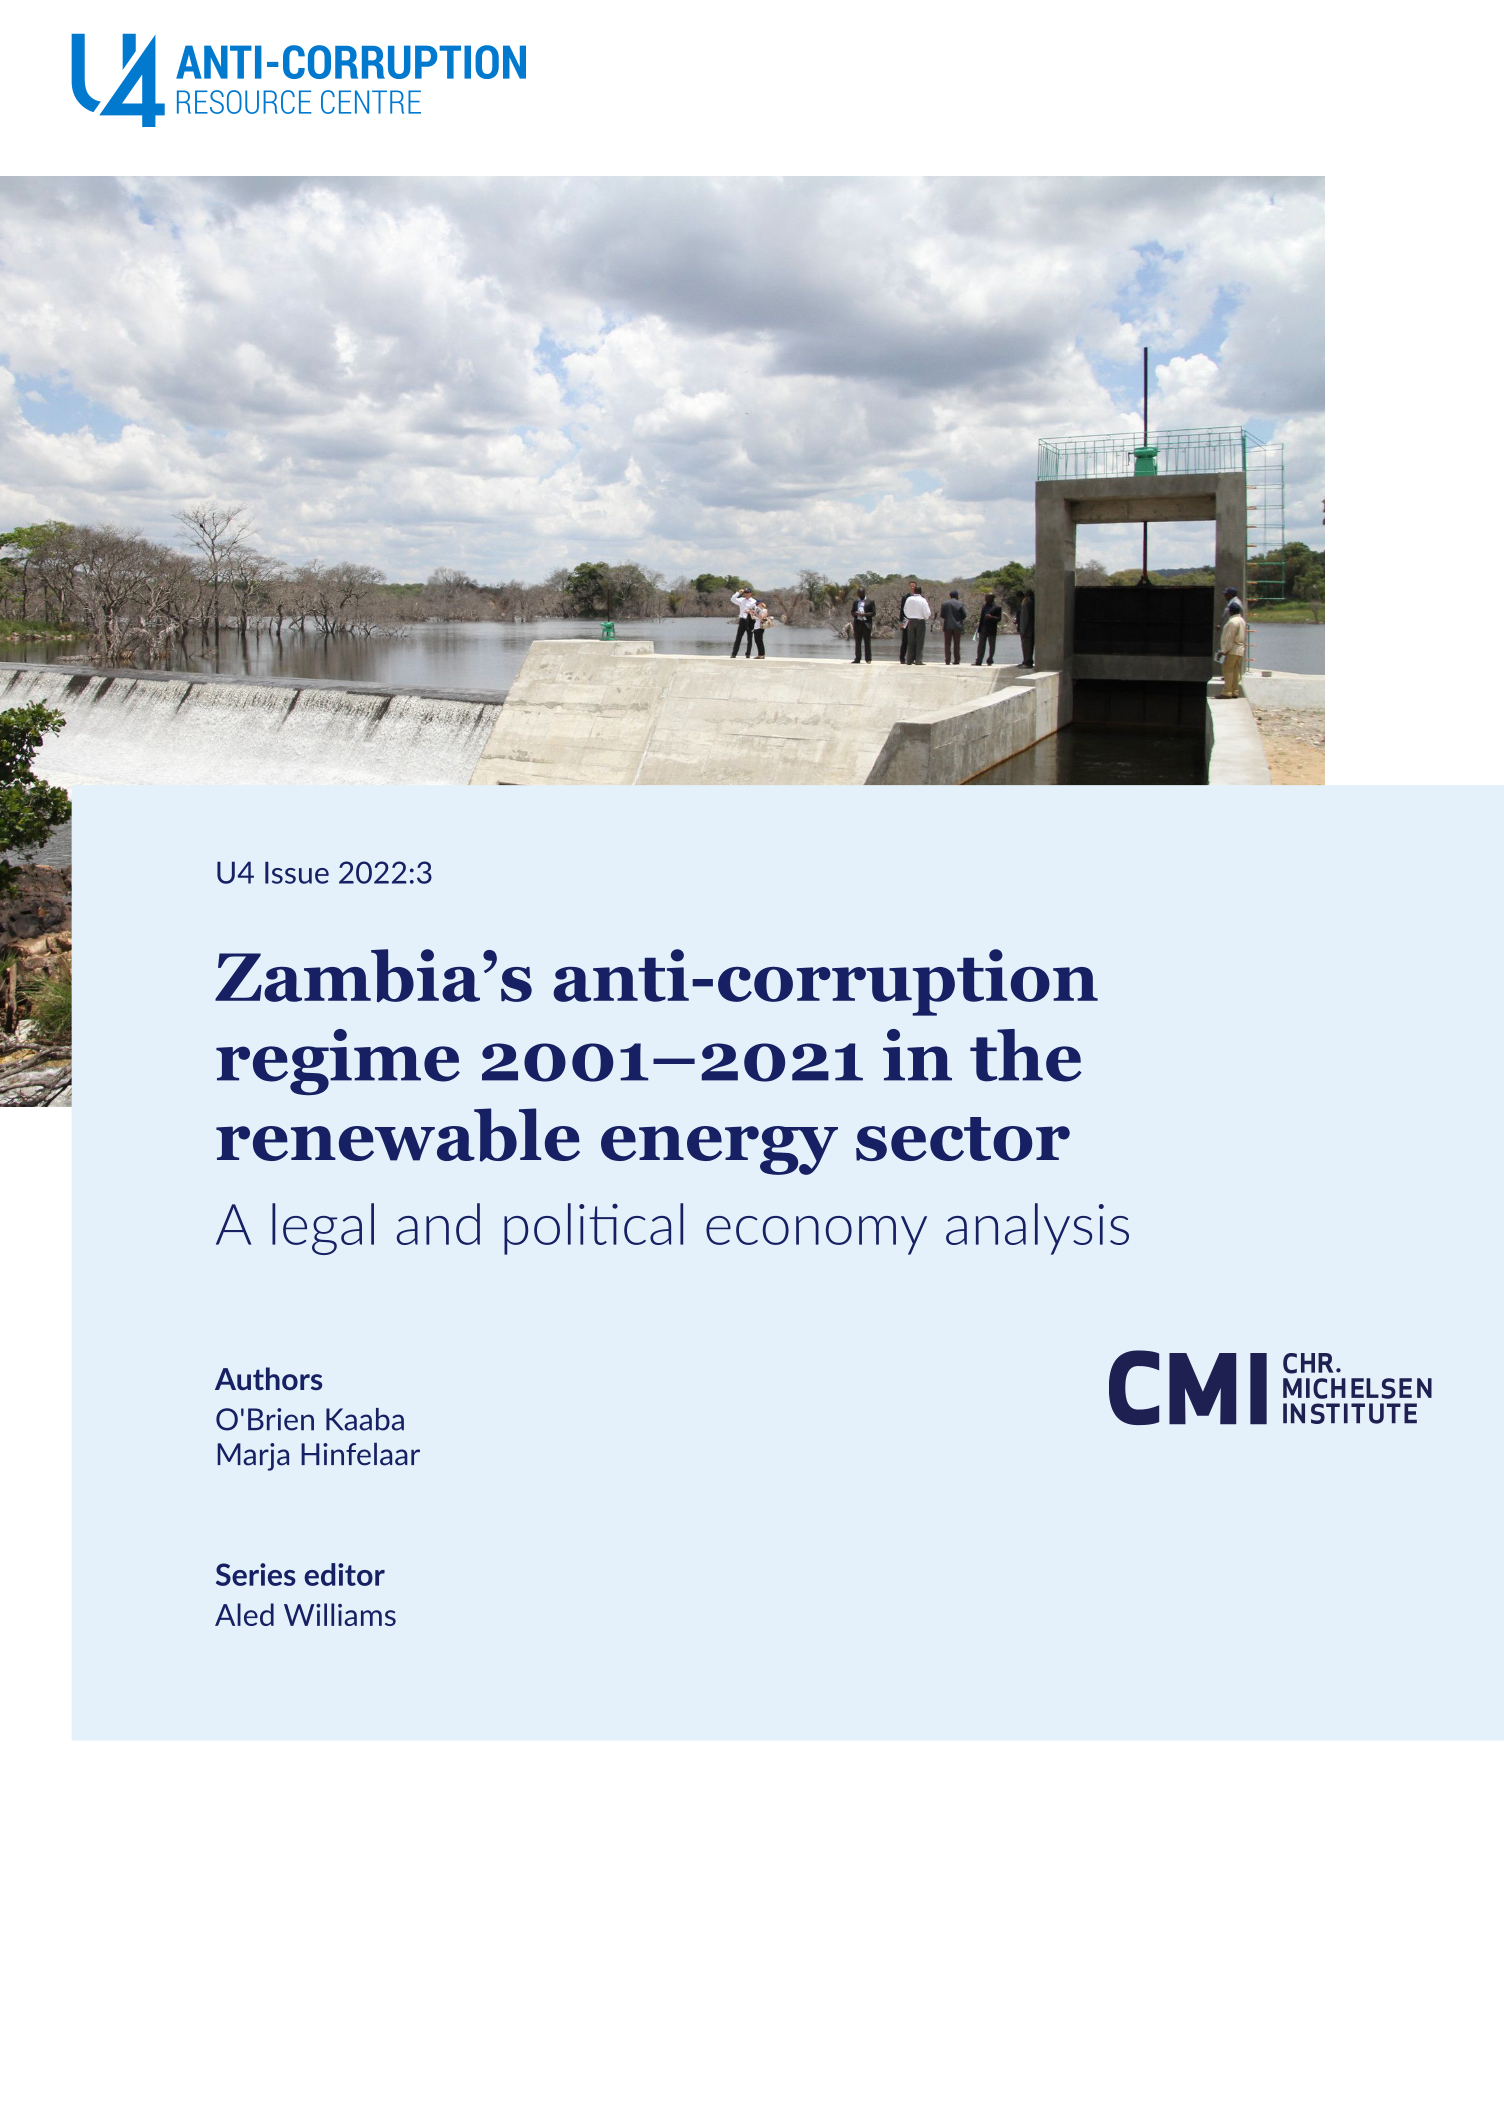 Zambia’s anti-corruption regime 2001–2021 in the renewable energy sector